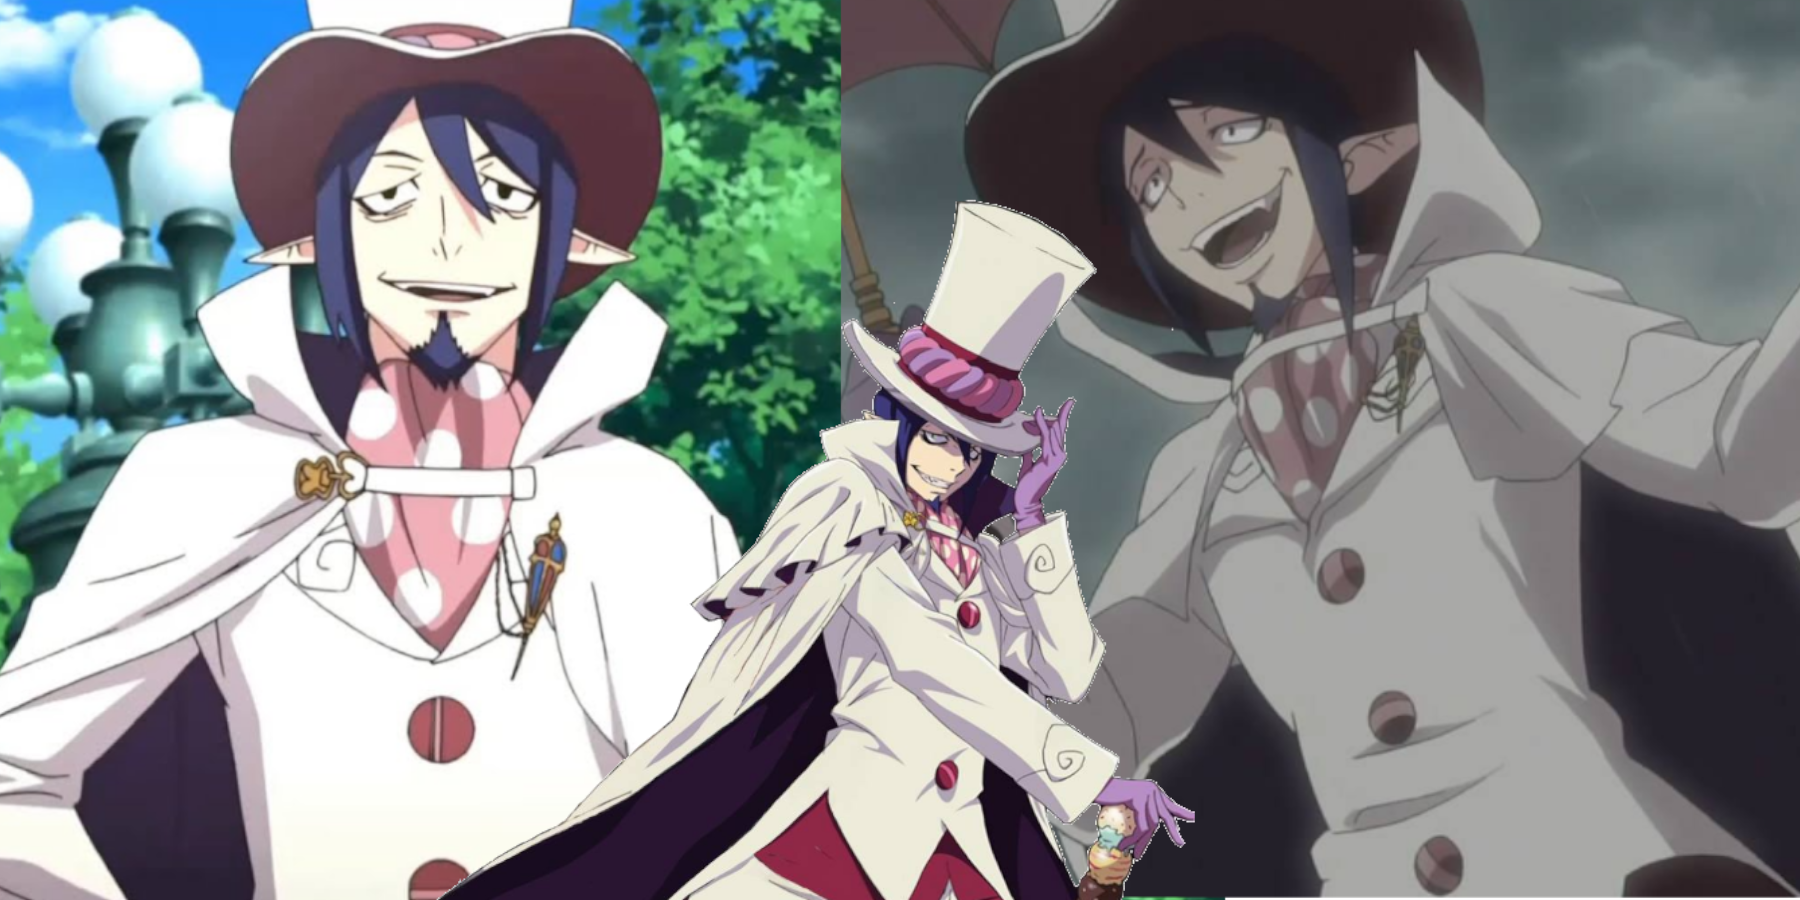 Mephisto from blue exorcist